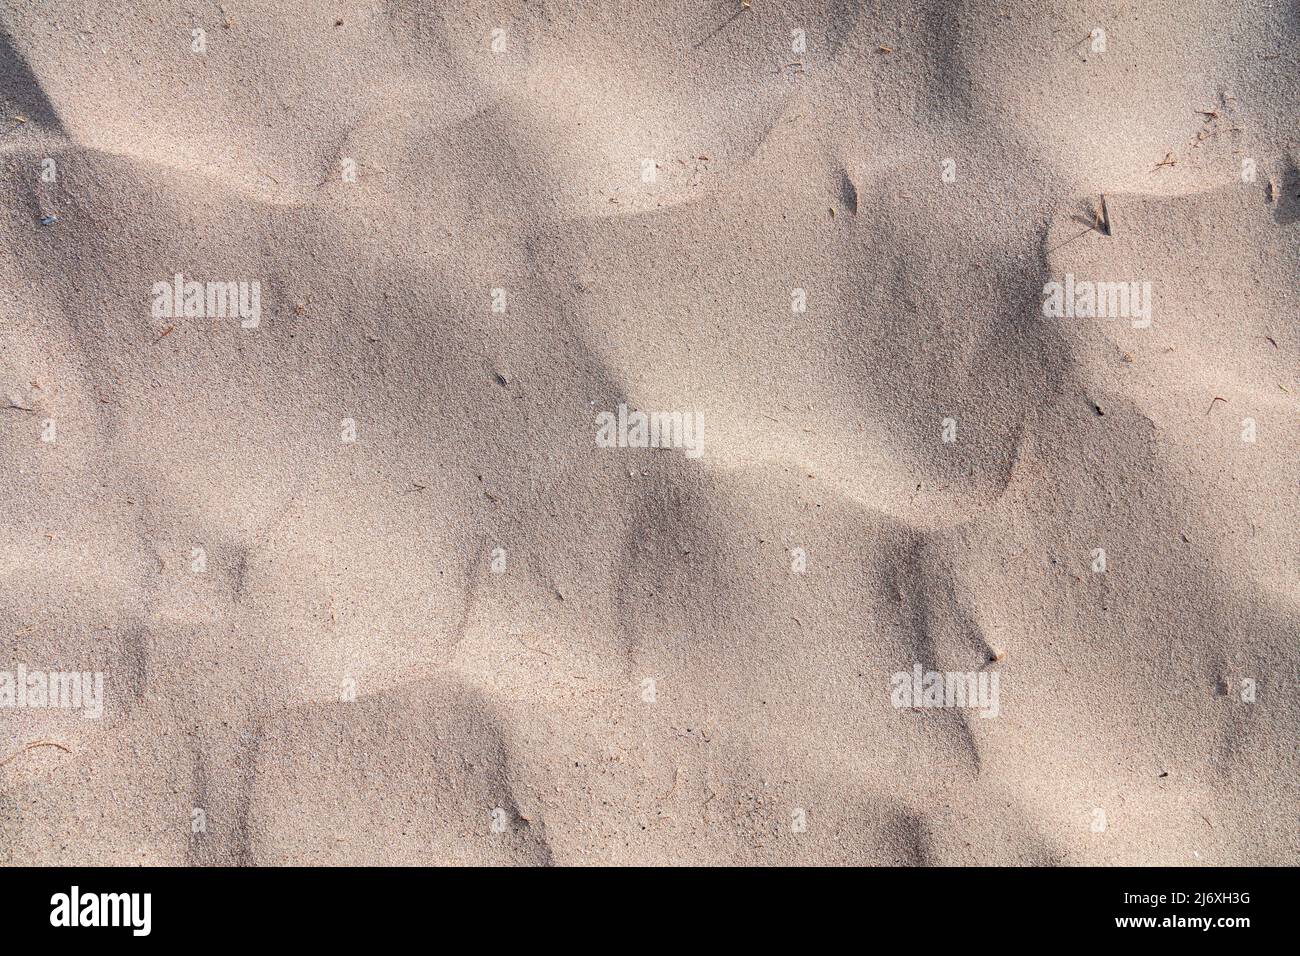 Sand texture background, top view. Sandy beach rippled. Natural material close up. Summer vacation concept. Stock Photo